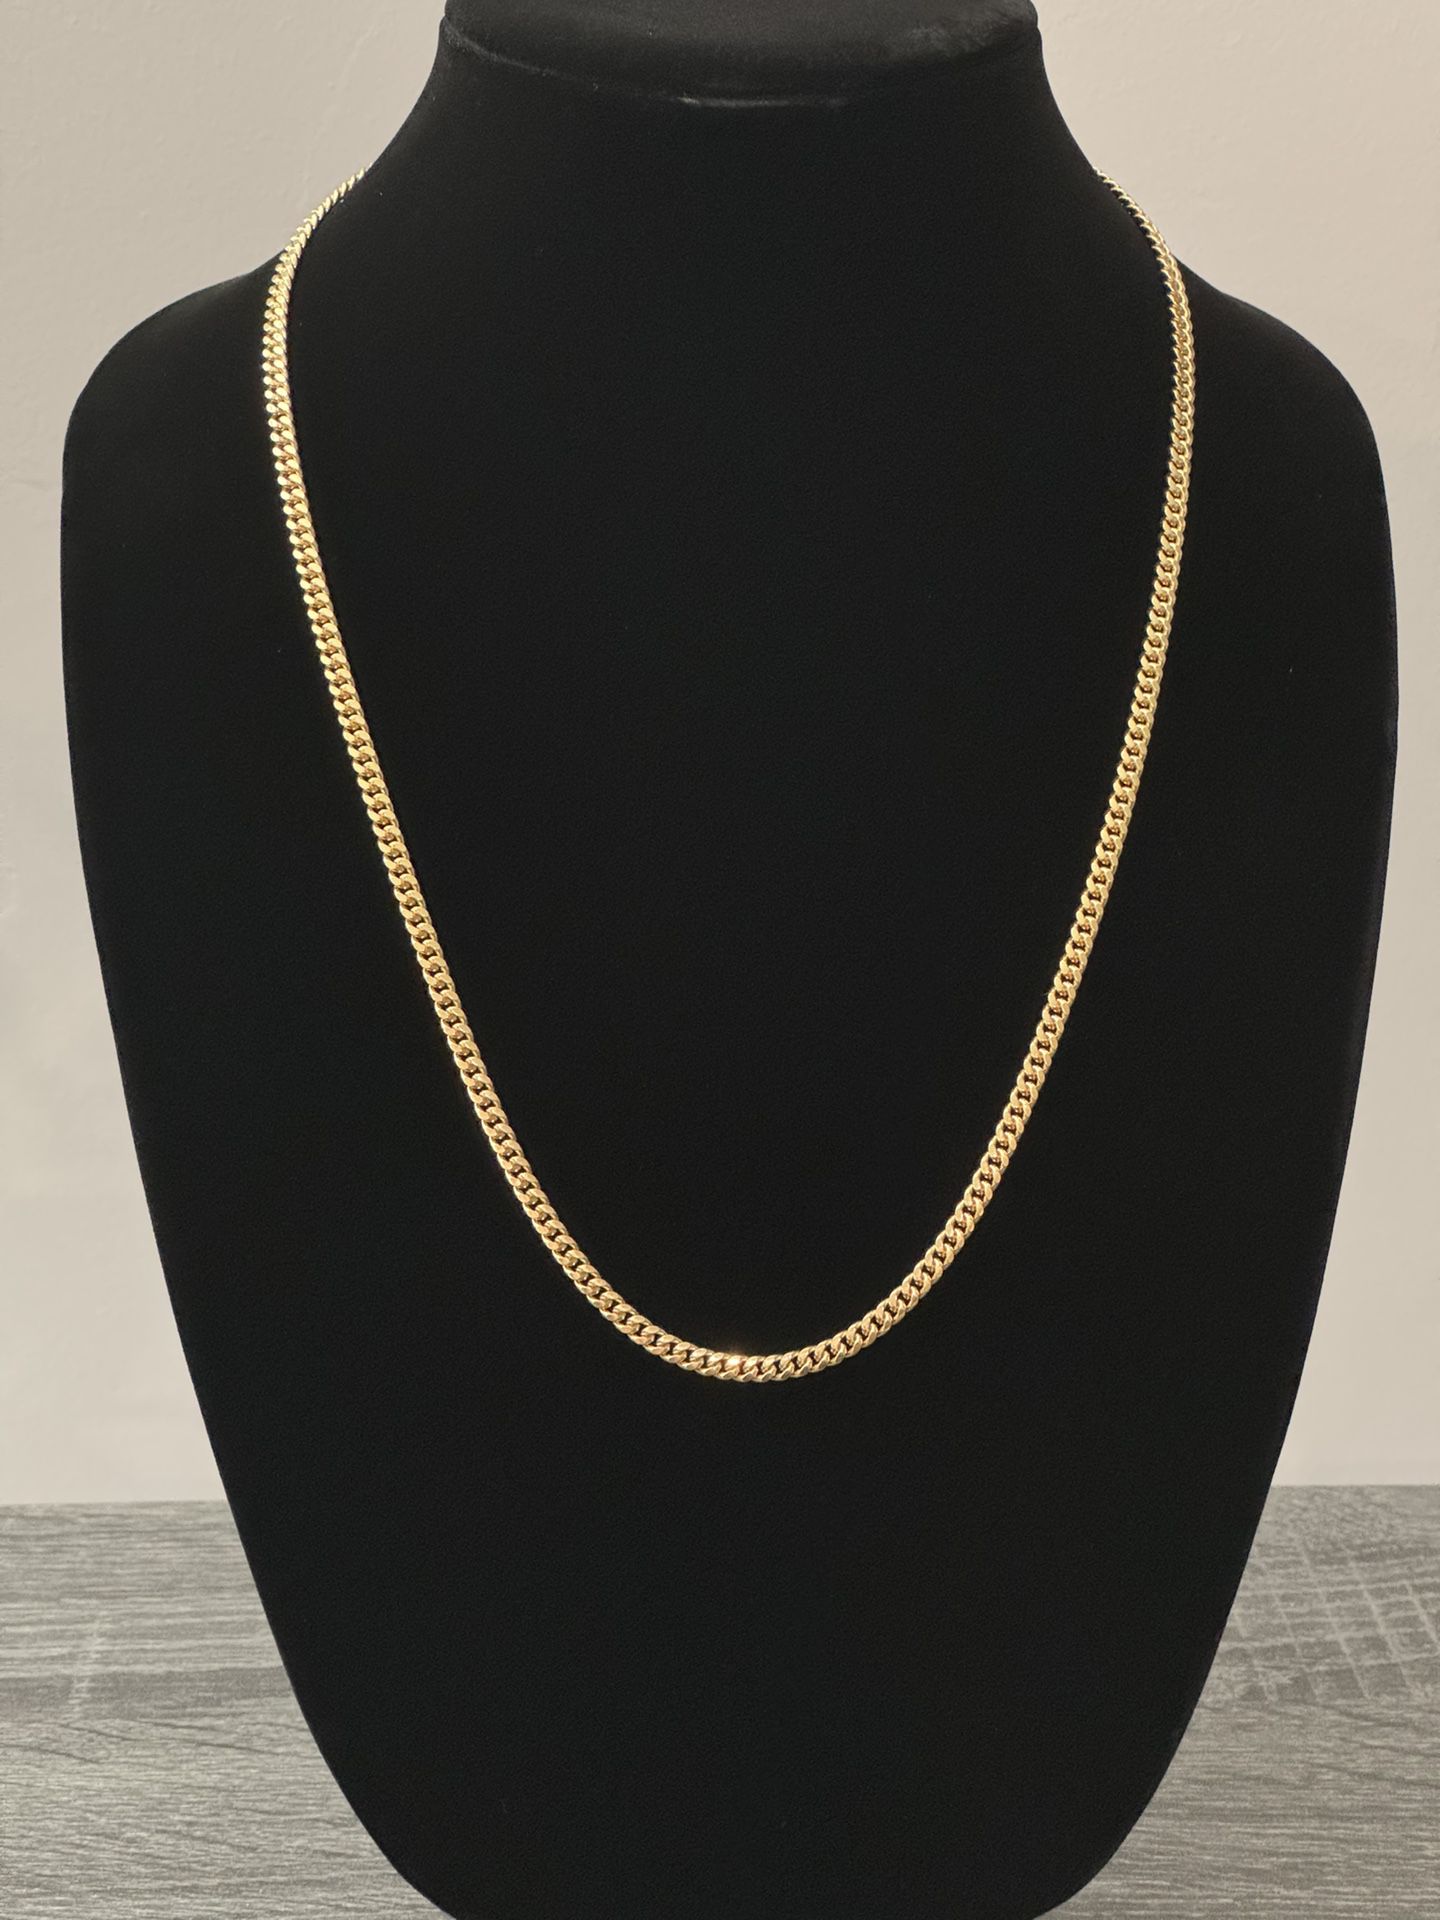 10k Solid Yellow Gold Cuban Link Chain